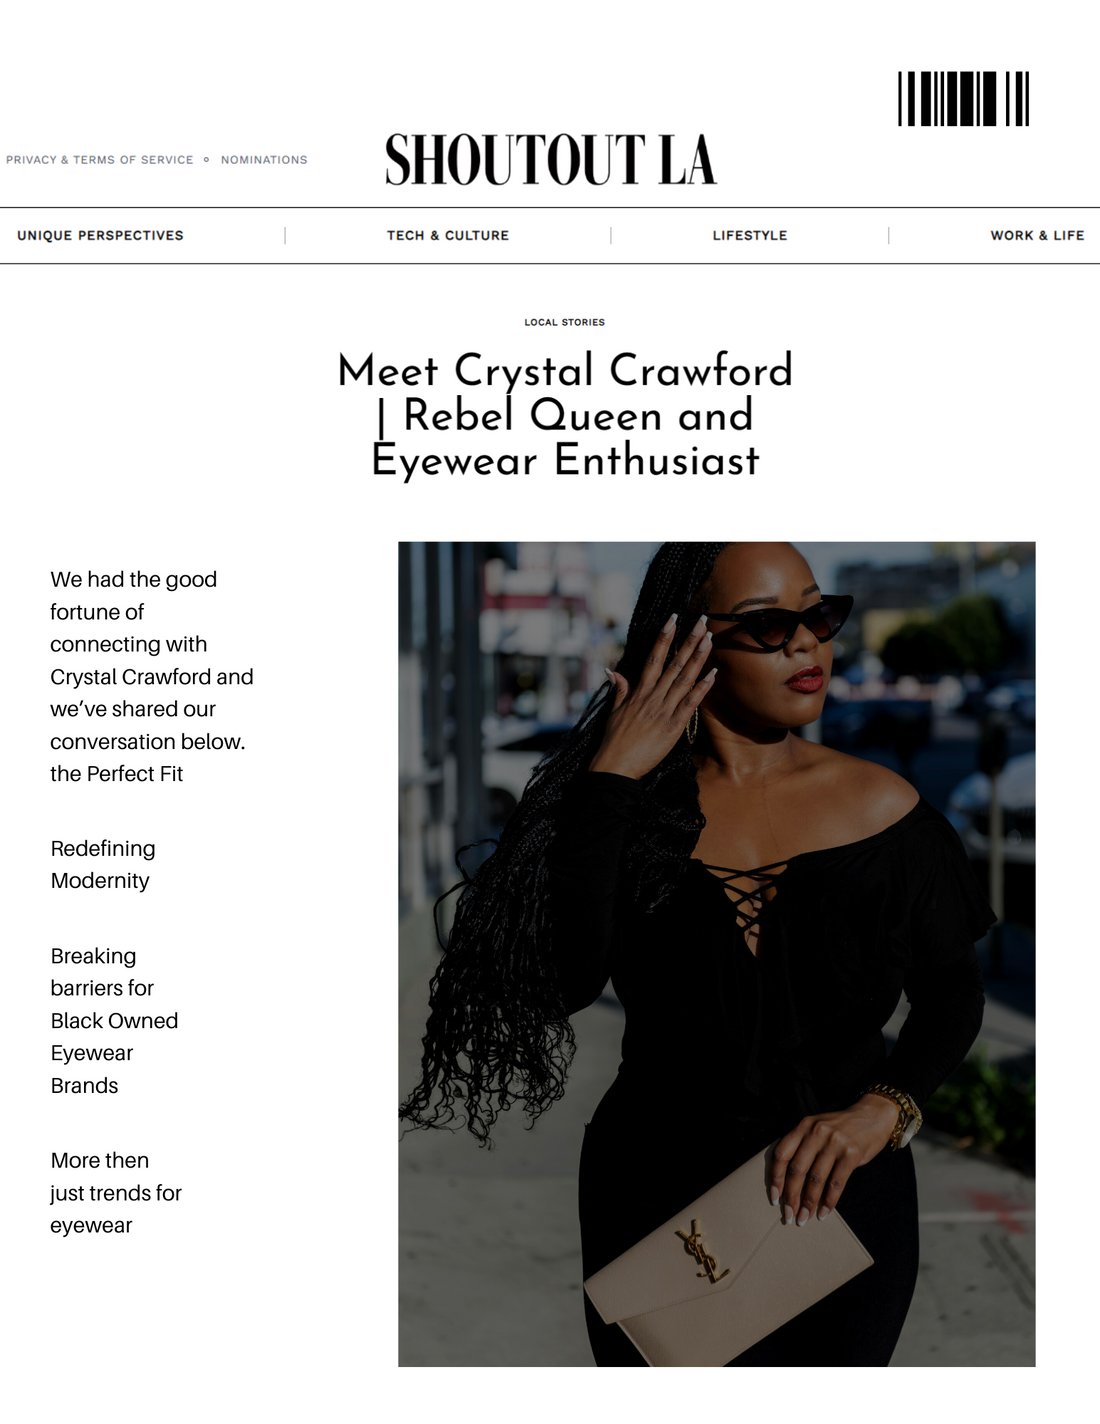 Meet-a-new-Black-Owned-Eyewear-Brand-that-s-changing-what-it-means-to-wear-eyewear-with-Shout-LA Liberated Eyewear, Inc.